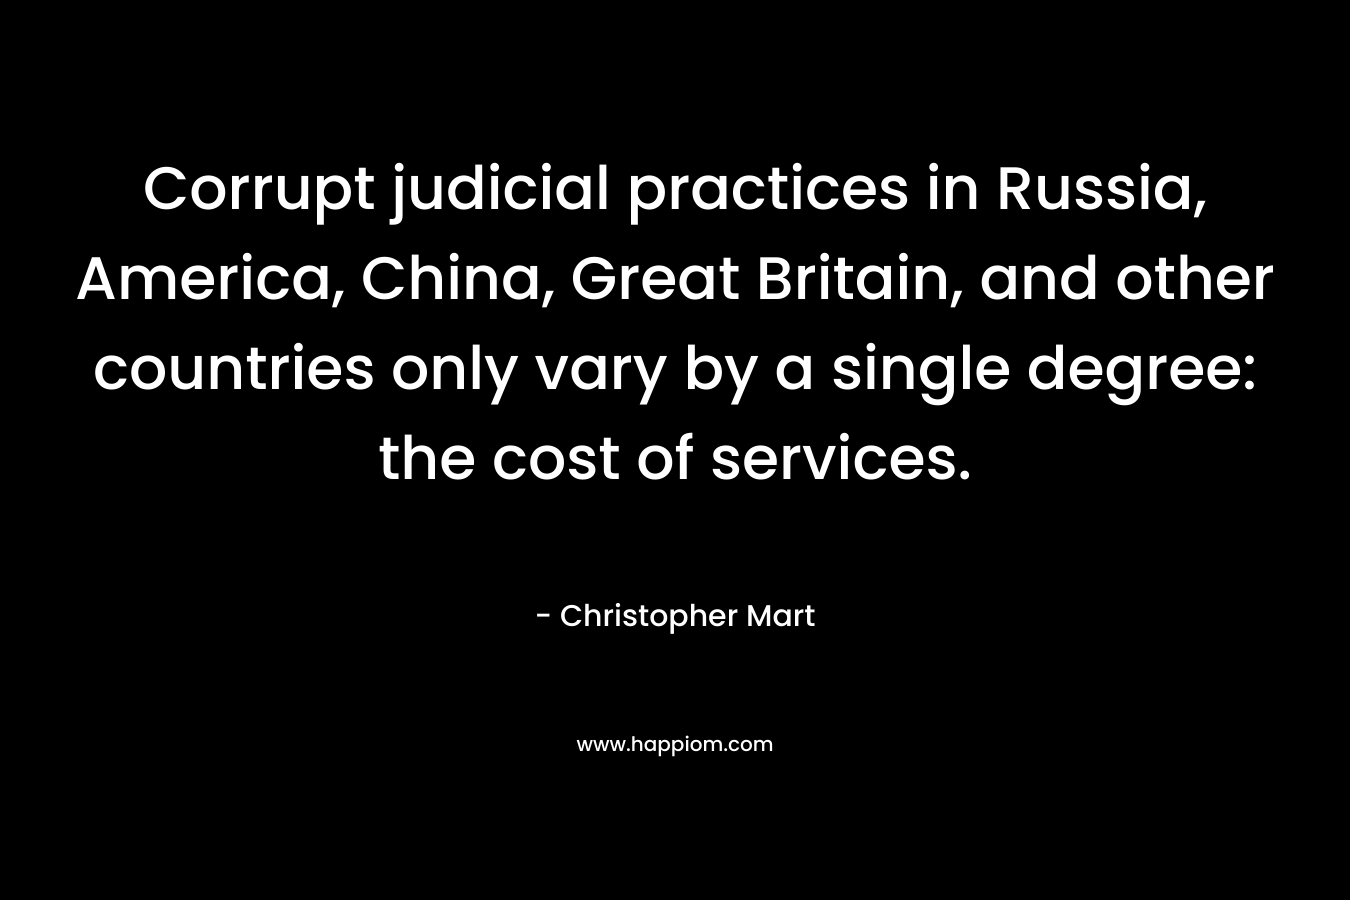 Corrupt judicial practices in Russia, America, China, Great Britain, and other countries only vary by a single degree: the cost of services.